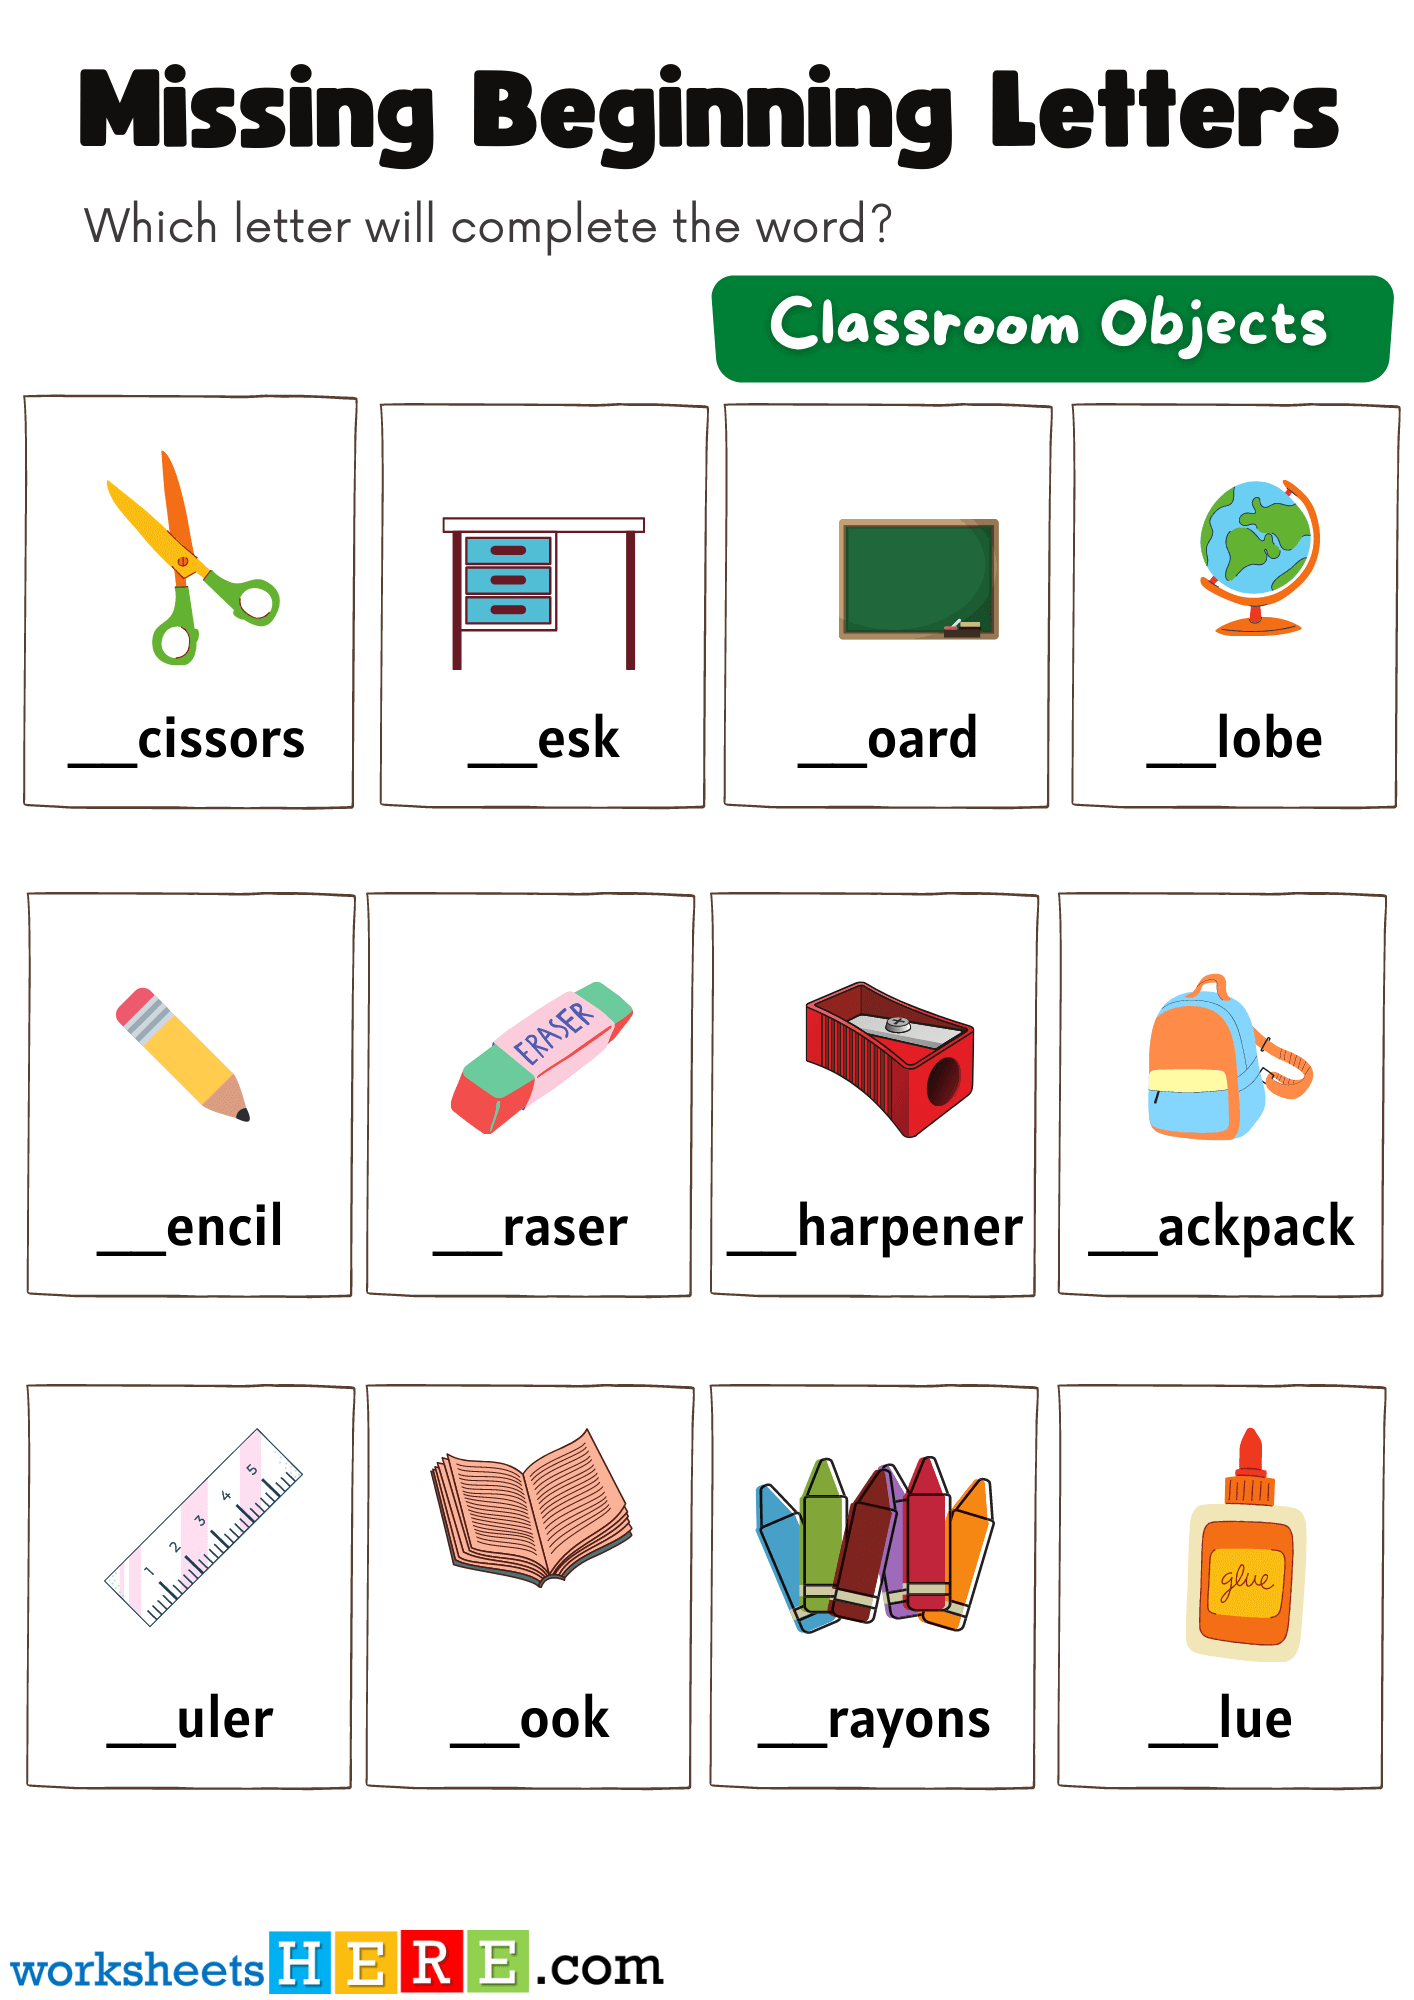 Missing Beginning Letters Activity with Classroom Objects, Free Kids Pdf Worksheets